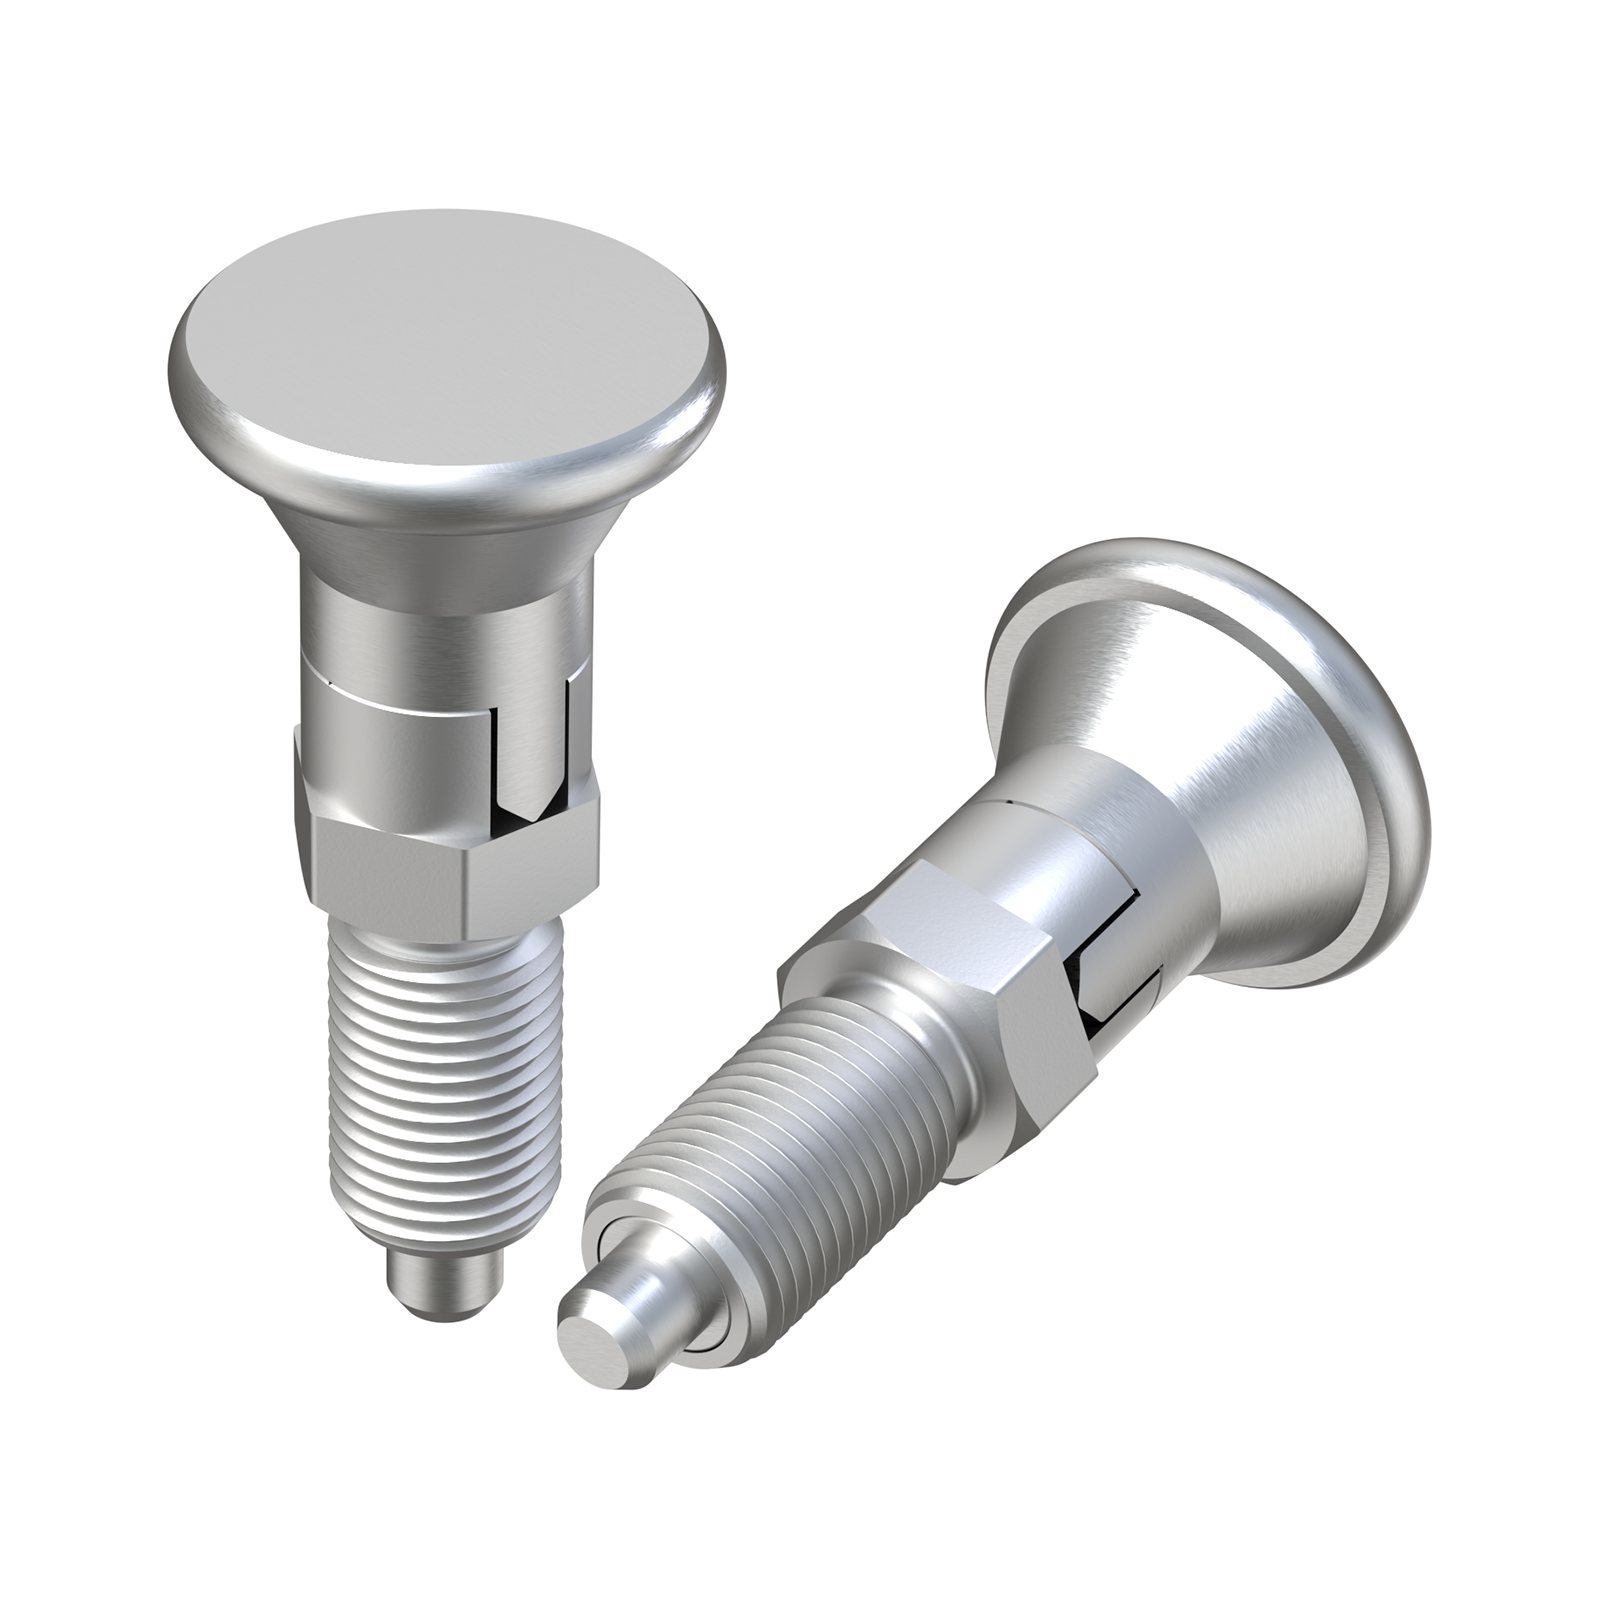 Index bolt with metal conical head with stop